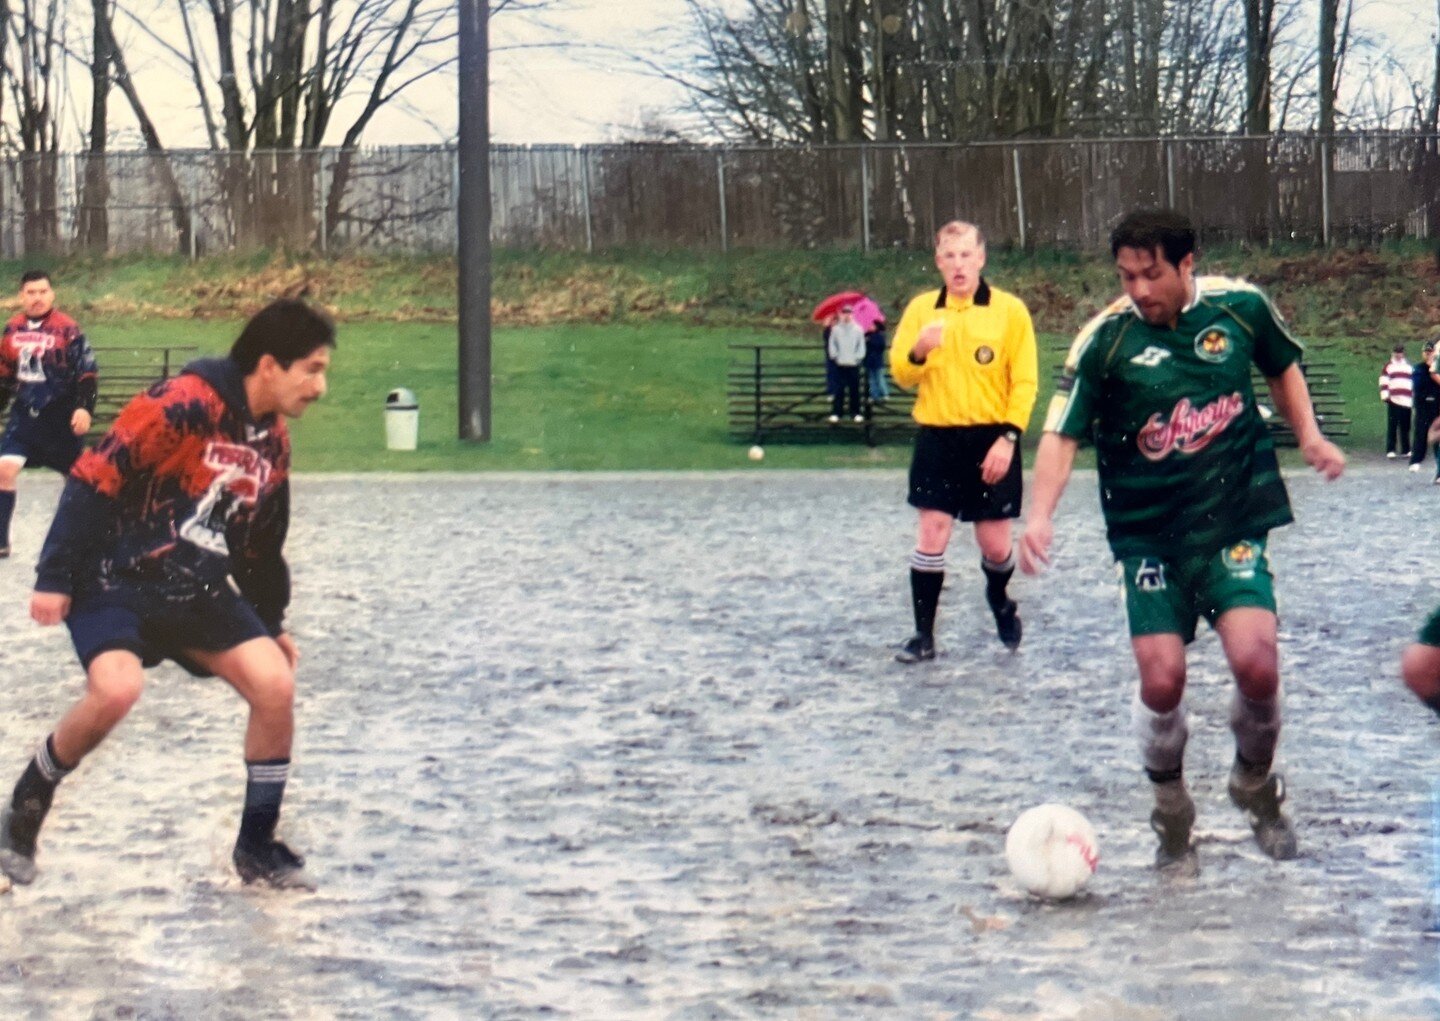 In the 90s, this is what passed for an 'all-weather' surface for Liga Hispana matches at Fort Dent (nowadays Starfire). In these conditions, there was no problem settling the ball. Getting it to move was another matter. 📷 Siete Dias/Raul Perez #TBT